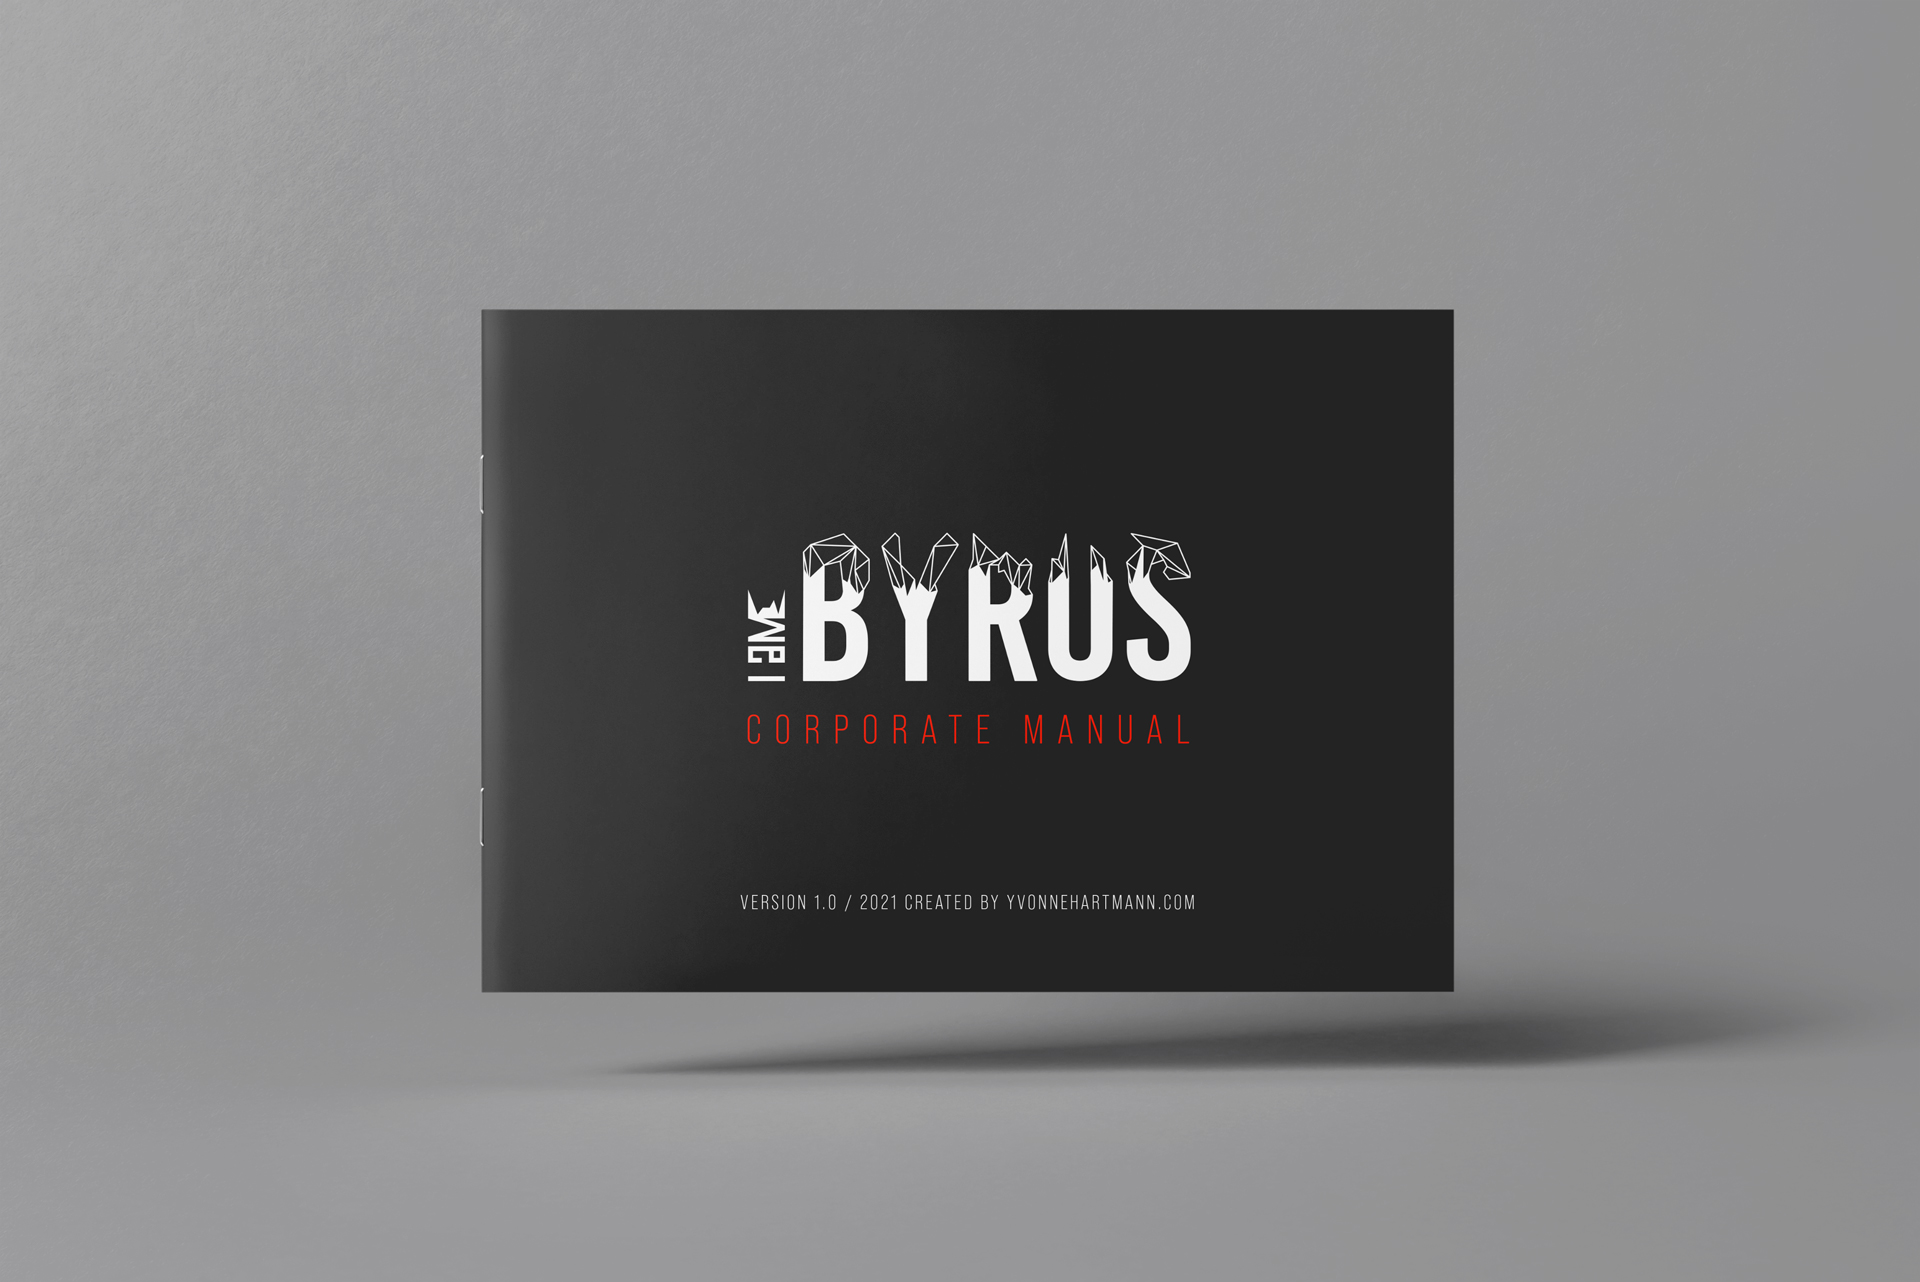 Visual branding for music producer I AM BYRUS by Yvonne Hartmann